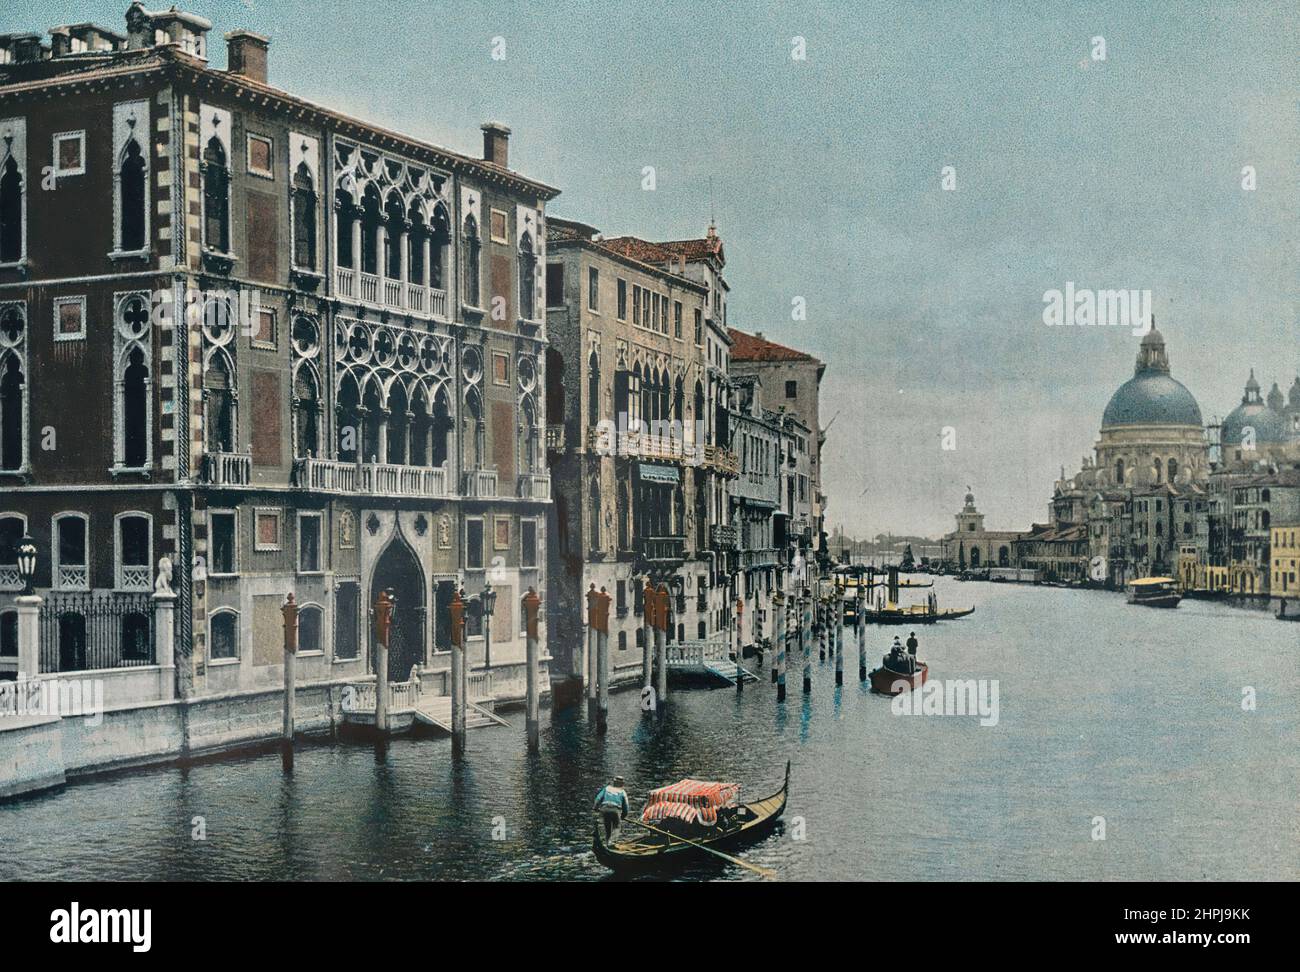 Venise Autour Du Monde Italy II 1895 - 1900  (2)  - 19 th century french colored photography print Stock Photo